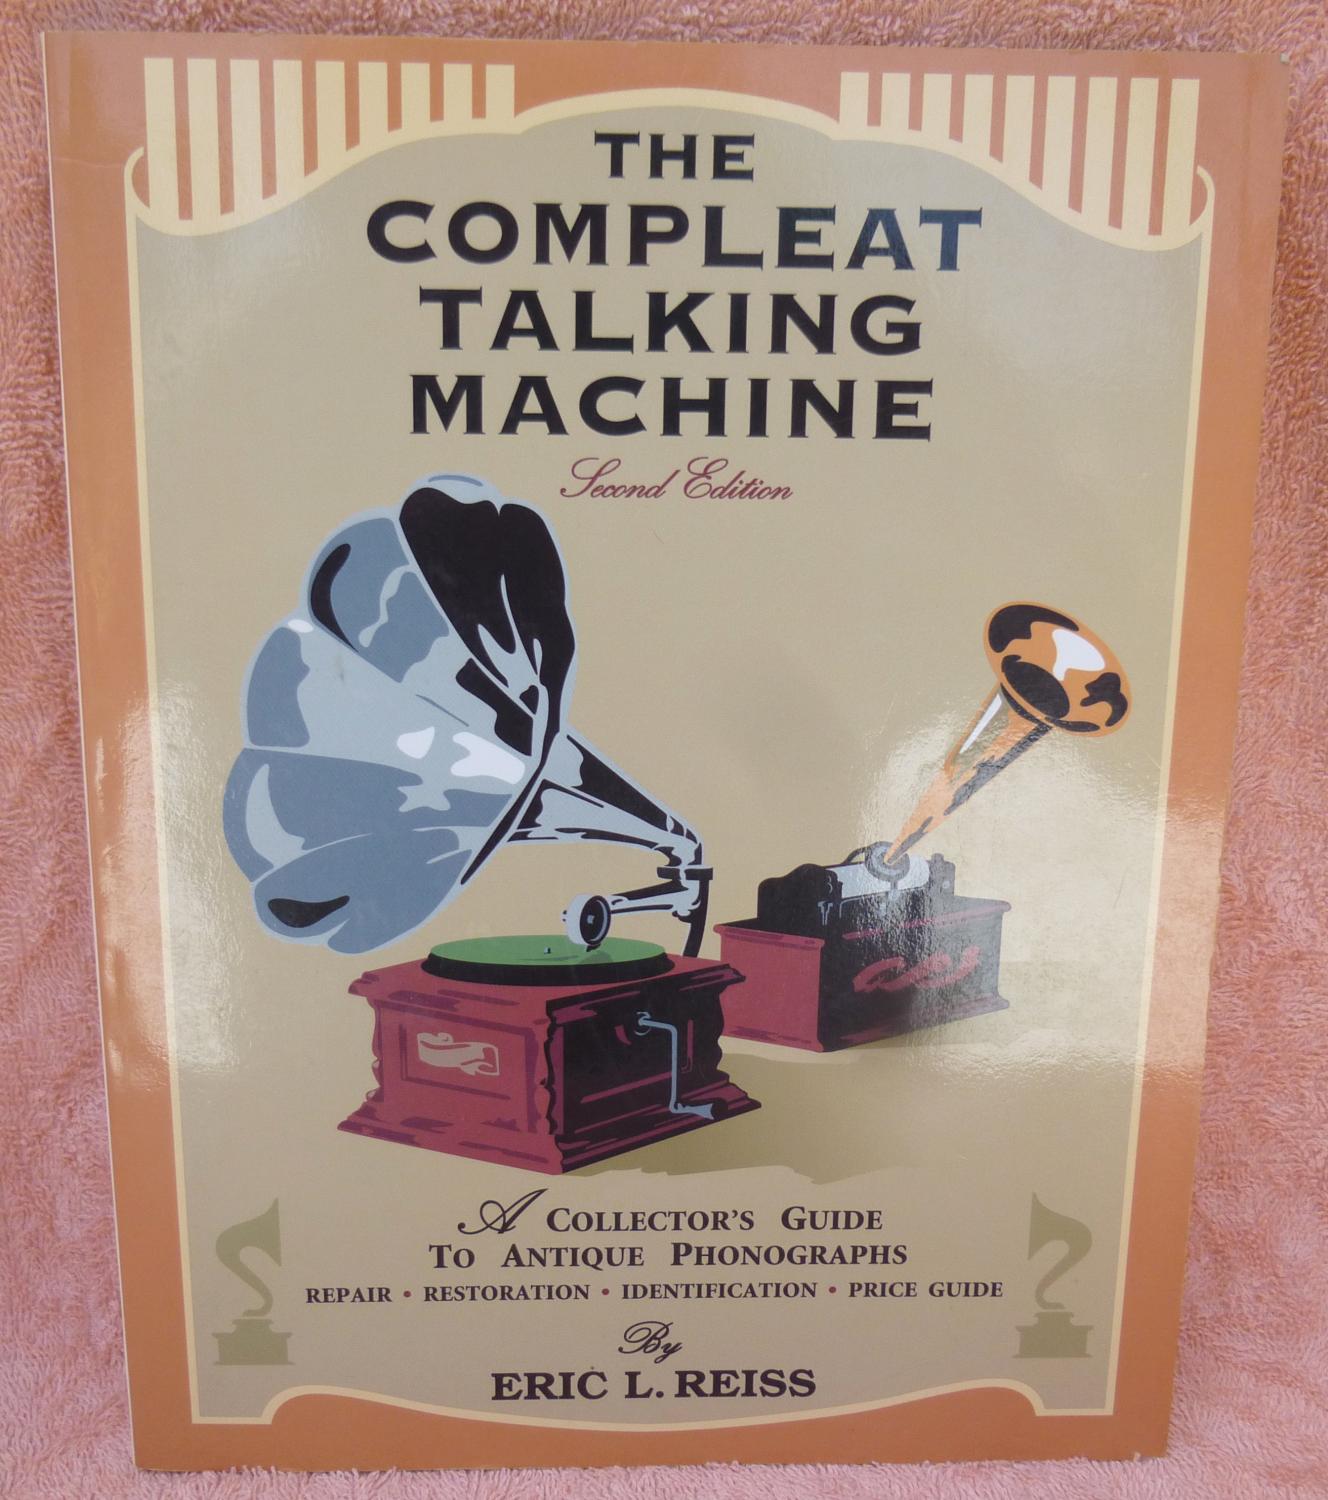 The Compleat Talking Machine: A Collector's Guide to Antique Phonographs - Reiss, Eric L.